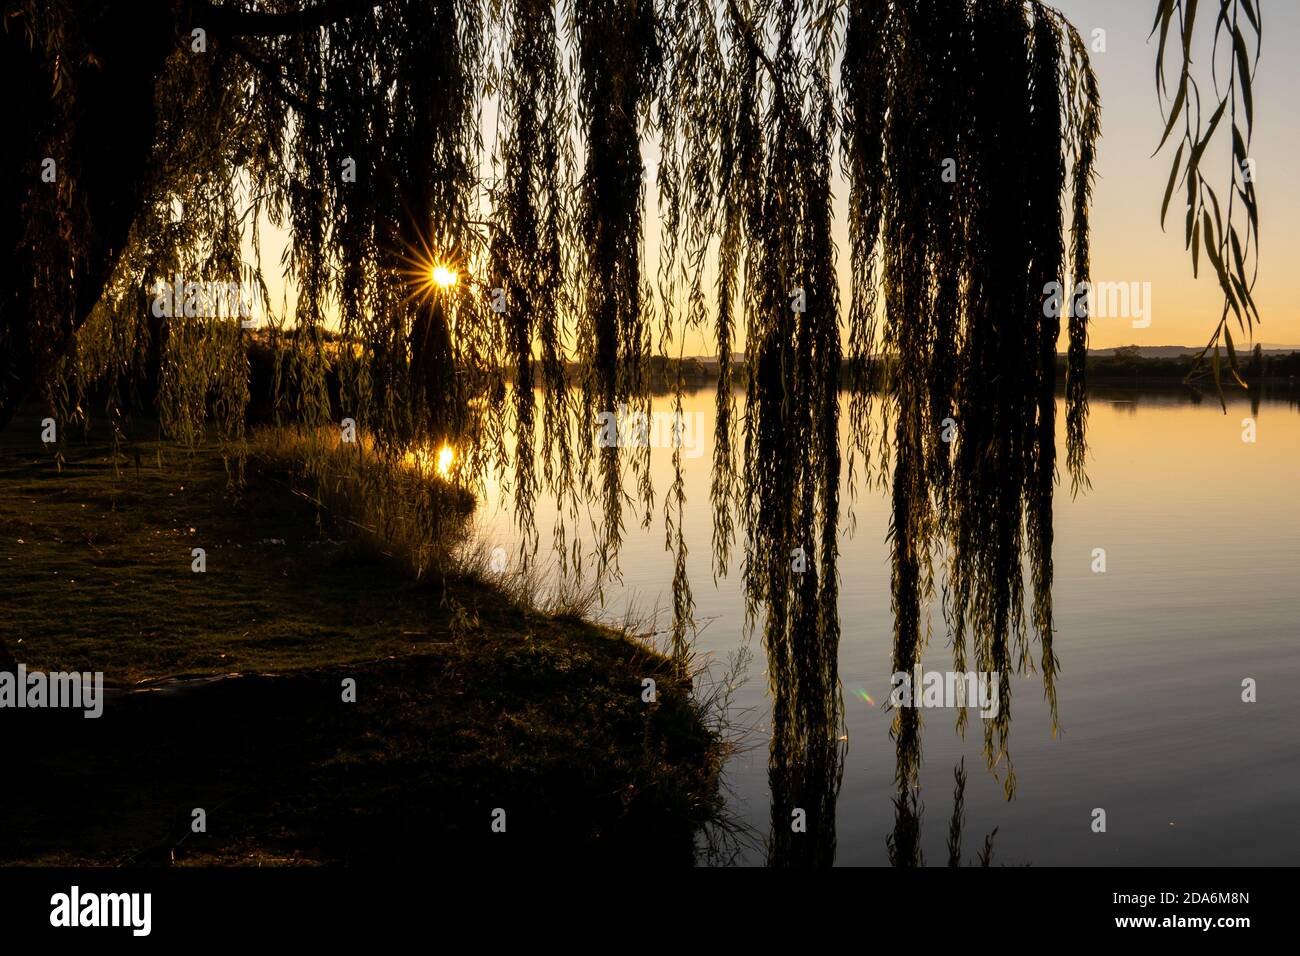 Weeping willow branches in a backlight shot at sunset in the Cazalegas reservoir Stock Photo